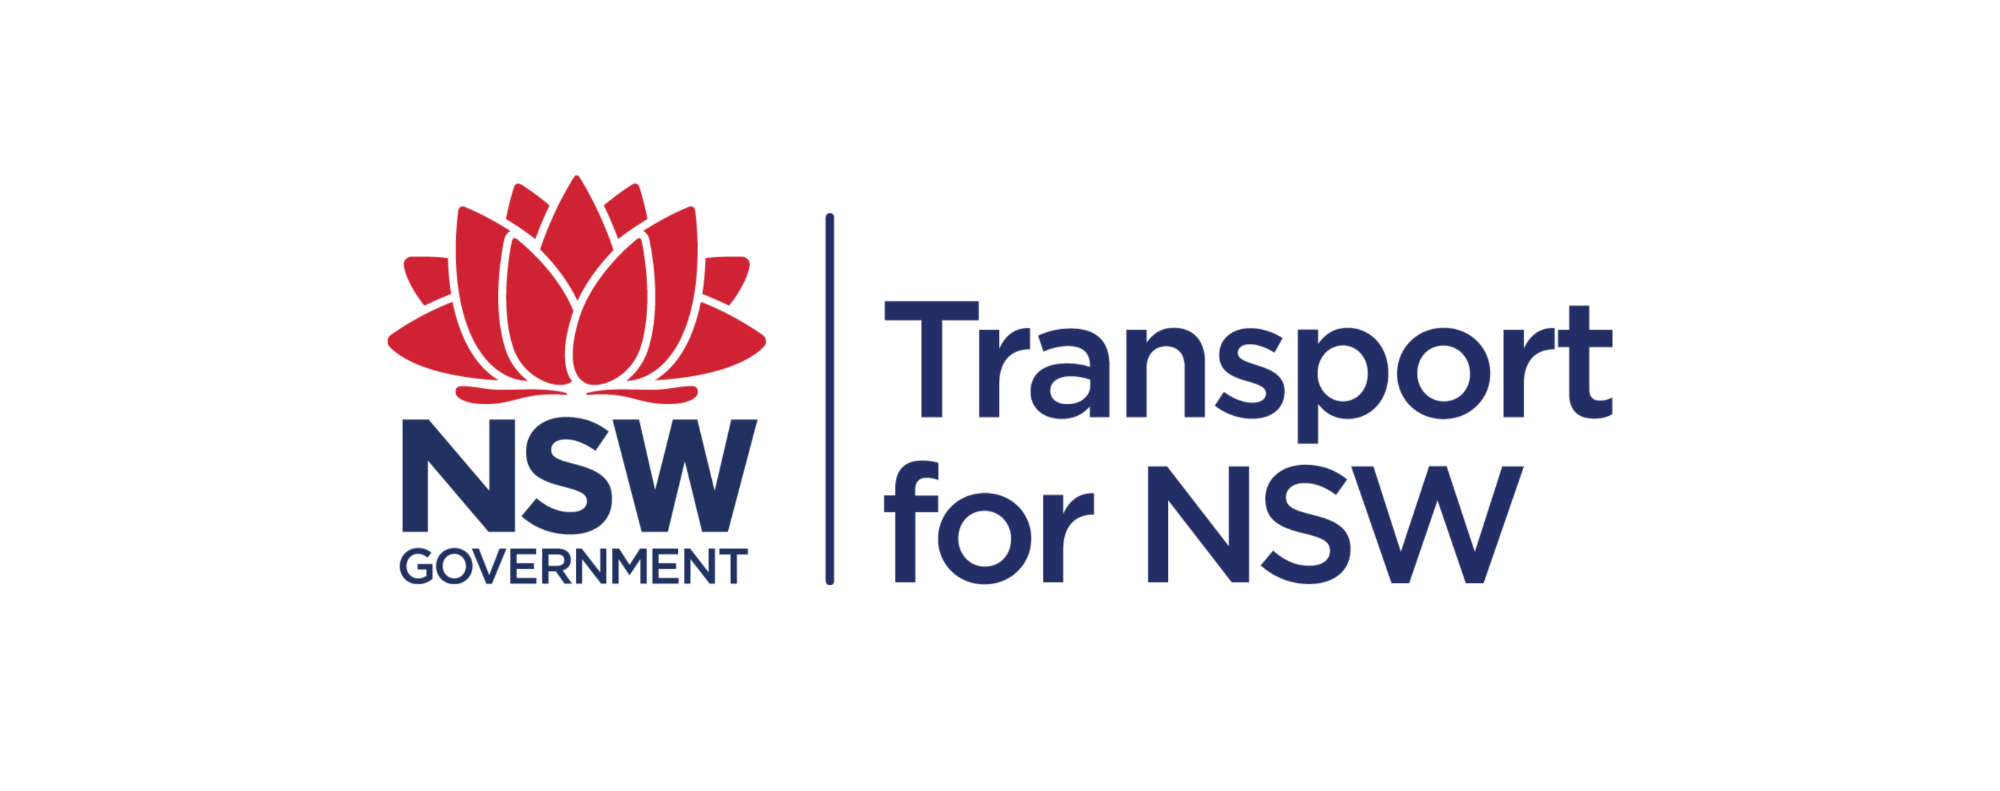 The Transport for NSW logo.